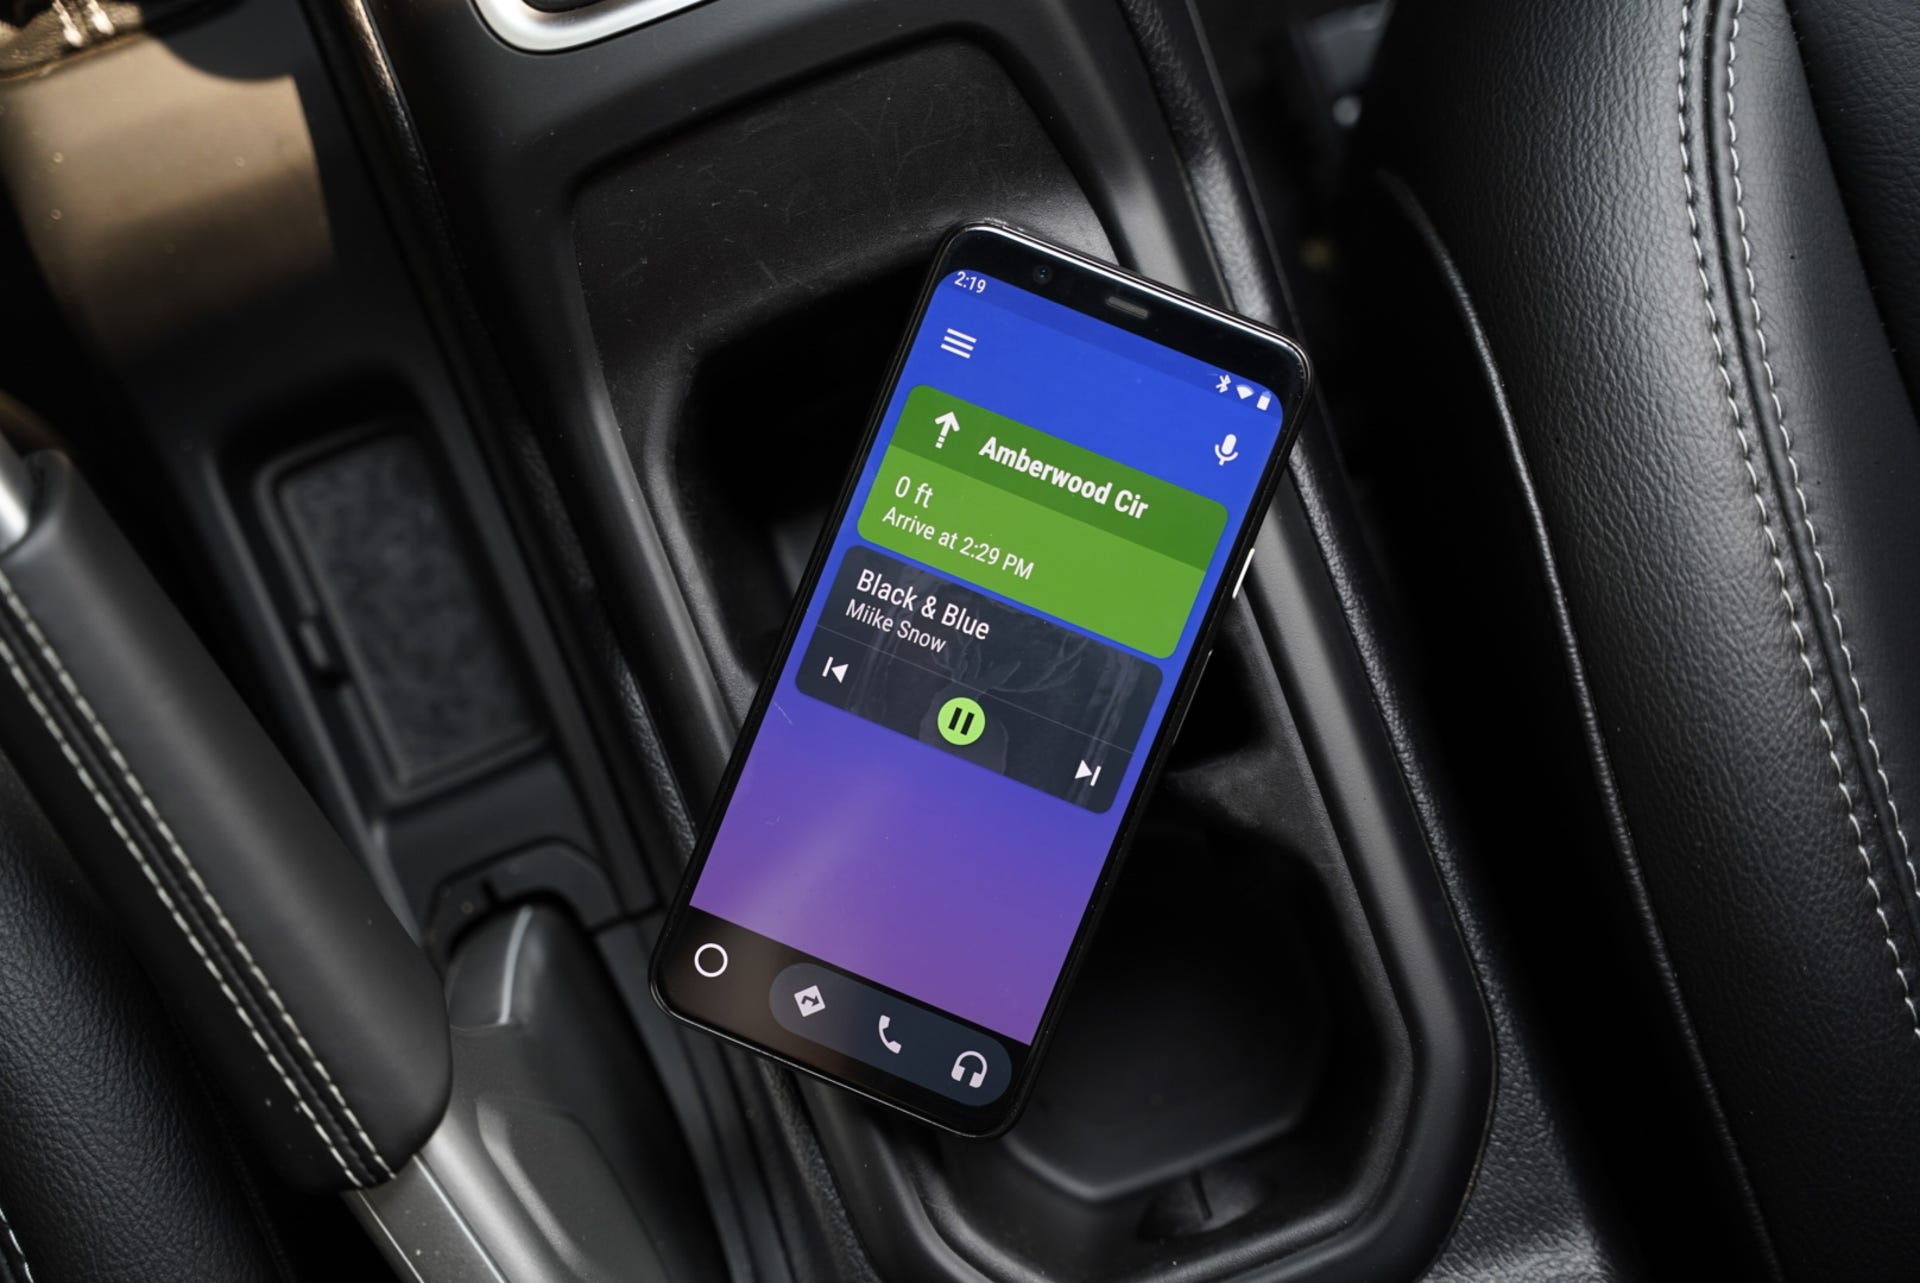 3 ways to dashboard-mount your smartphone - CNET